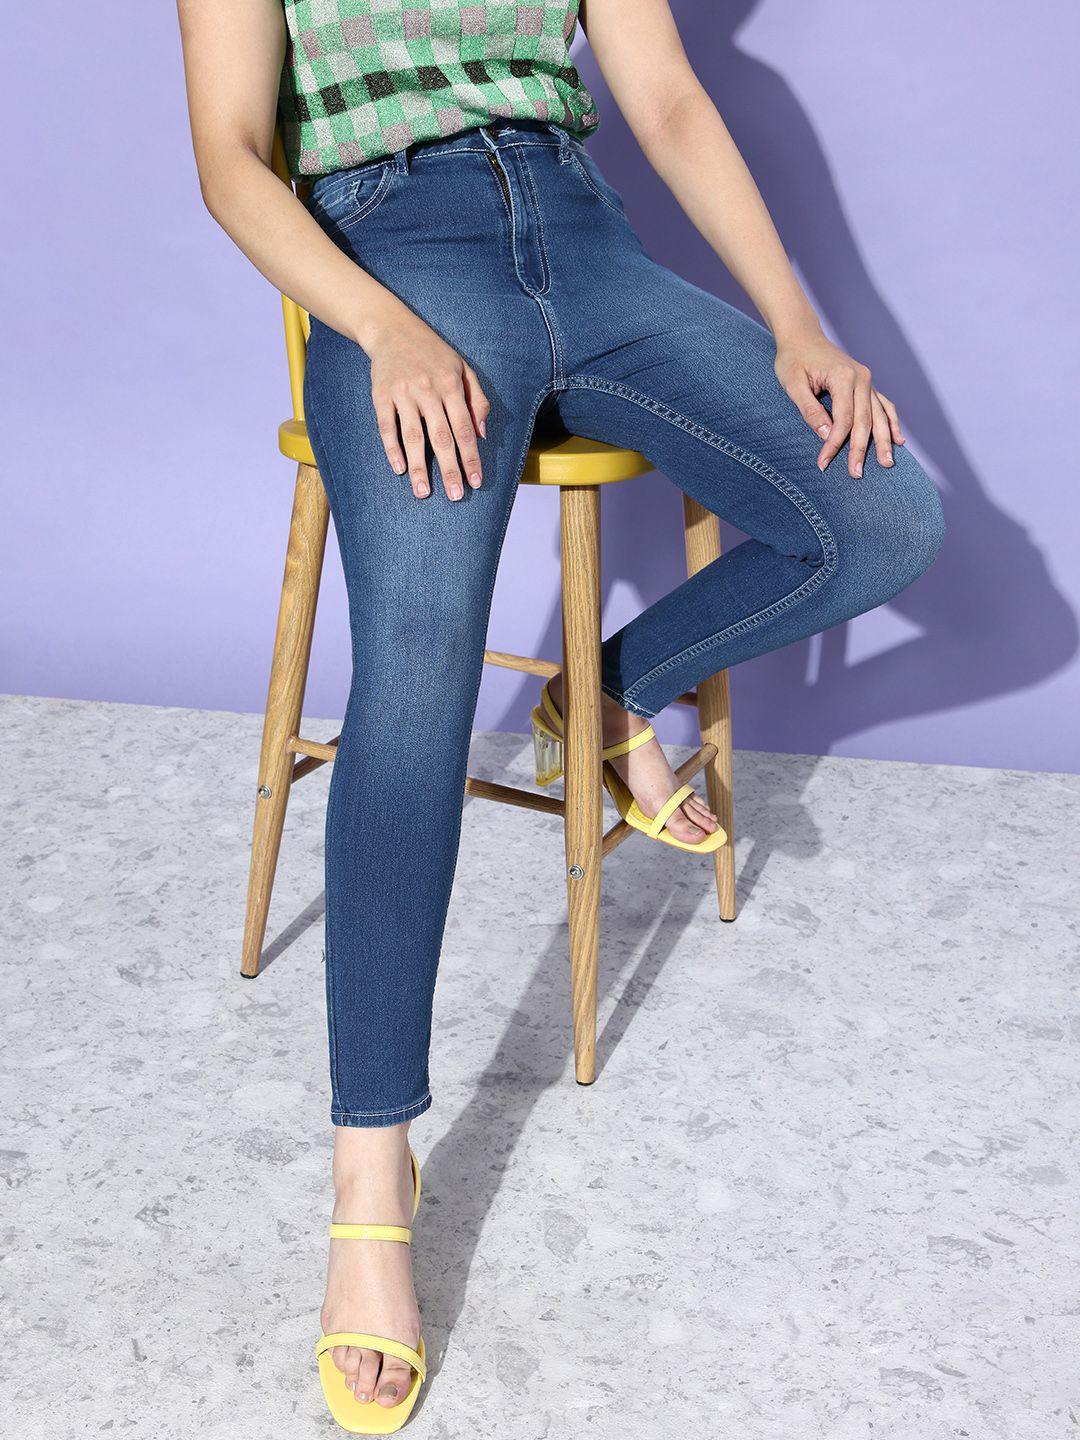 the-roadster-lifestyle-co.-women-blue-skinny-fit-high-rise-stretchable-jeans